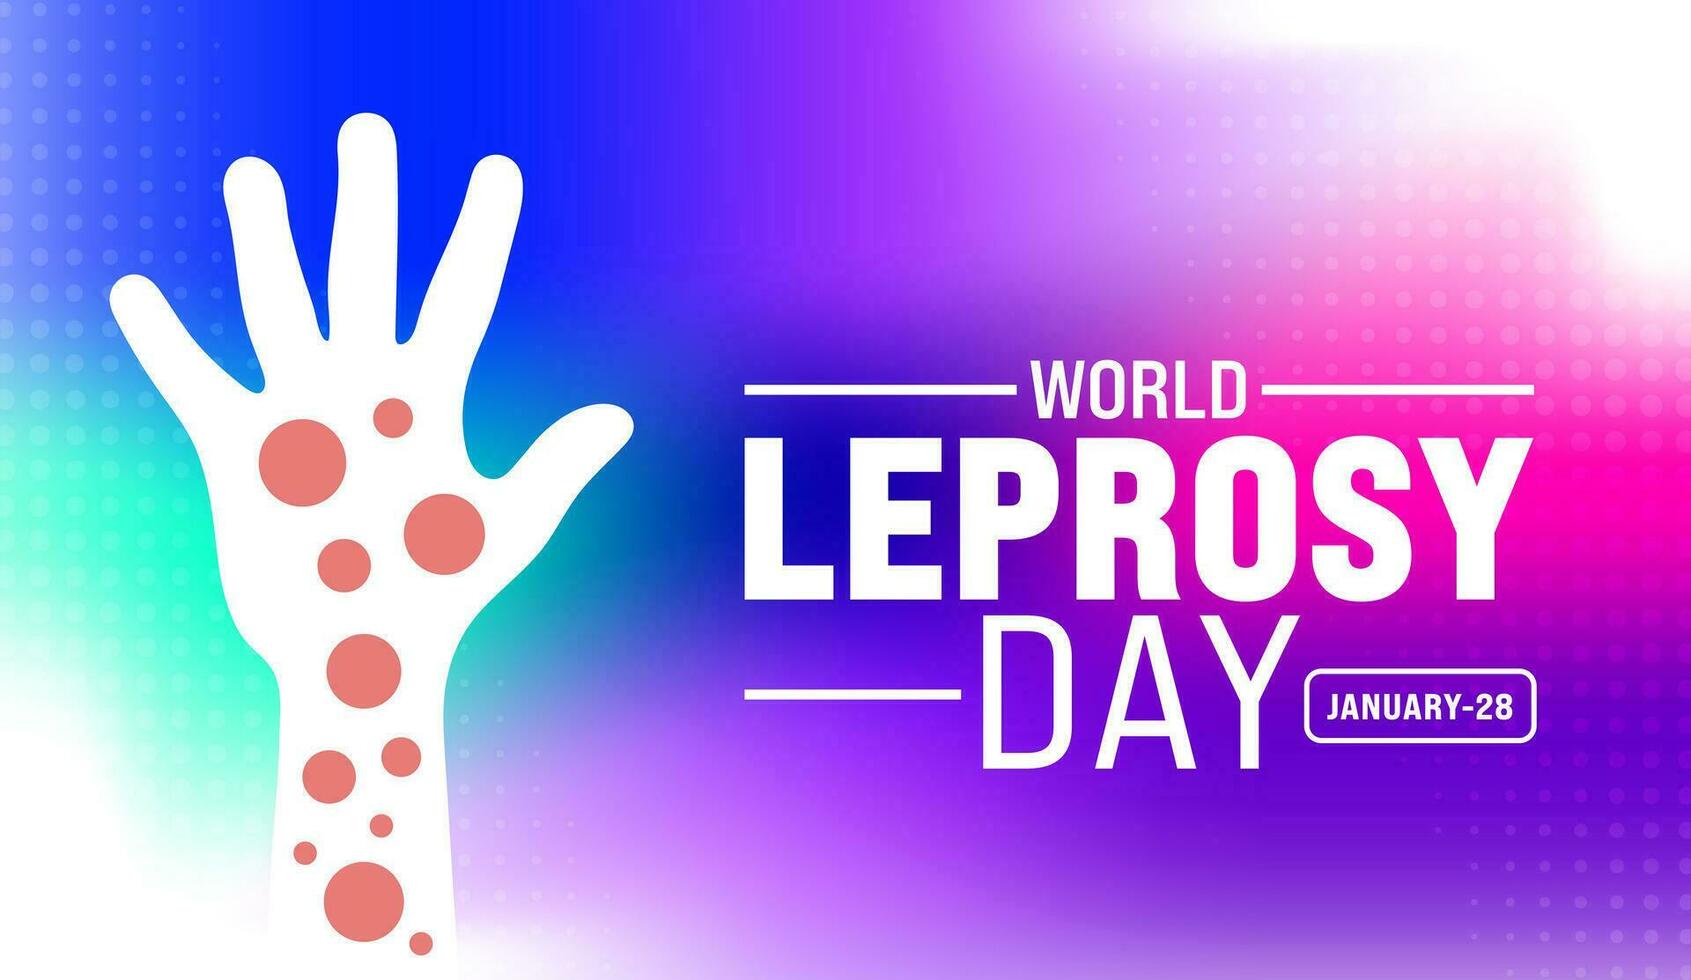 World Leprosy Day background design template use to background, banner, placard, card, book cover,  and poster design template with text inscription and standard color. vector illustration.